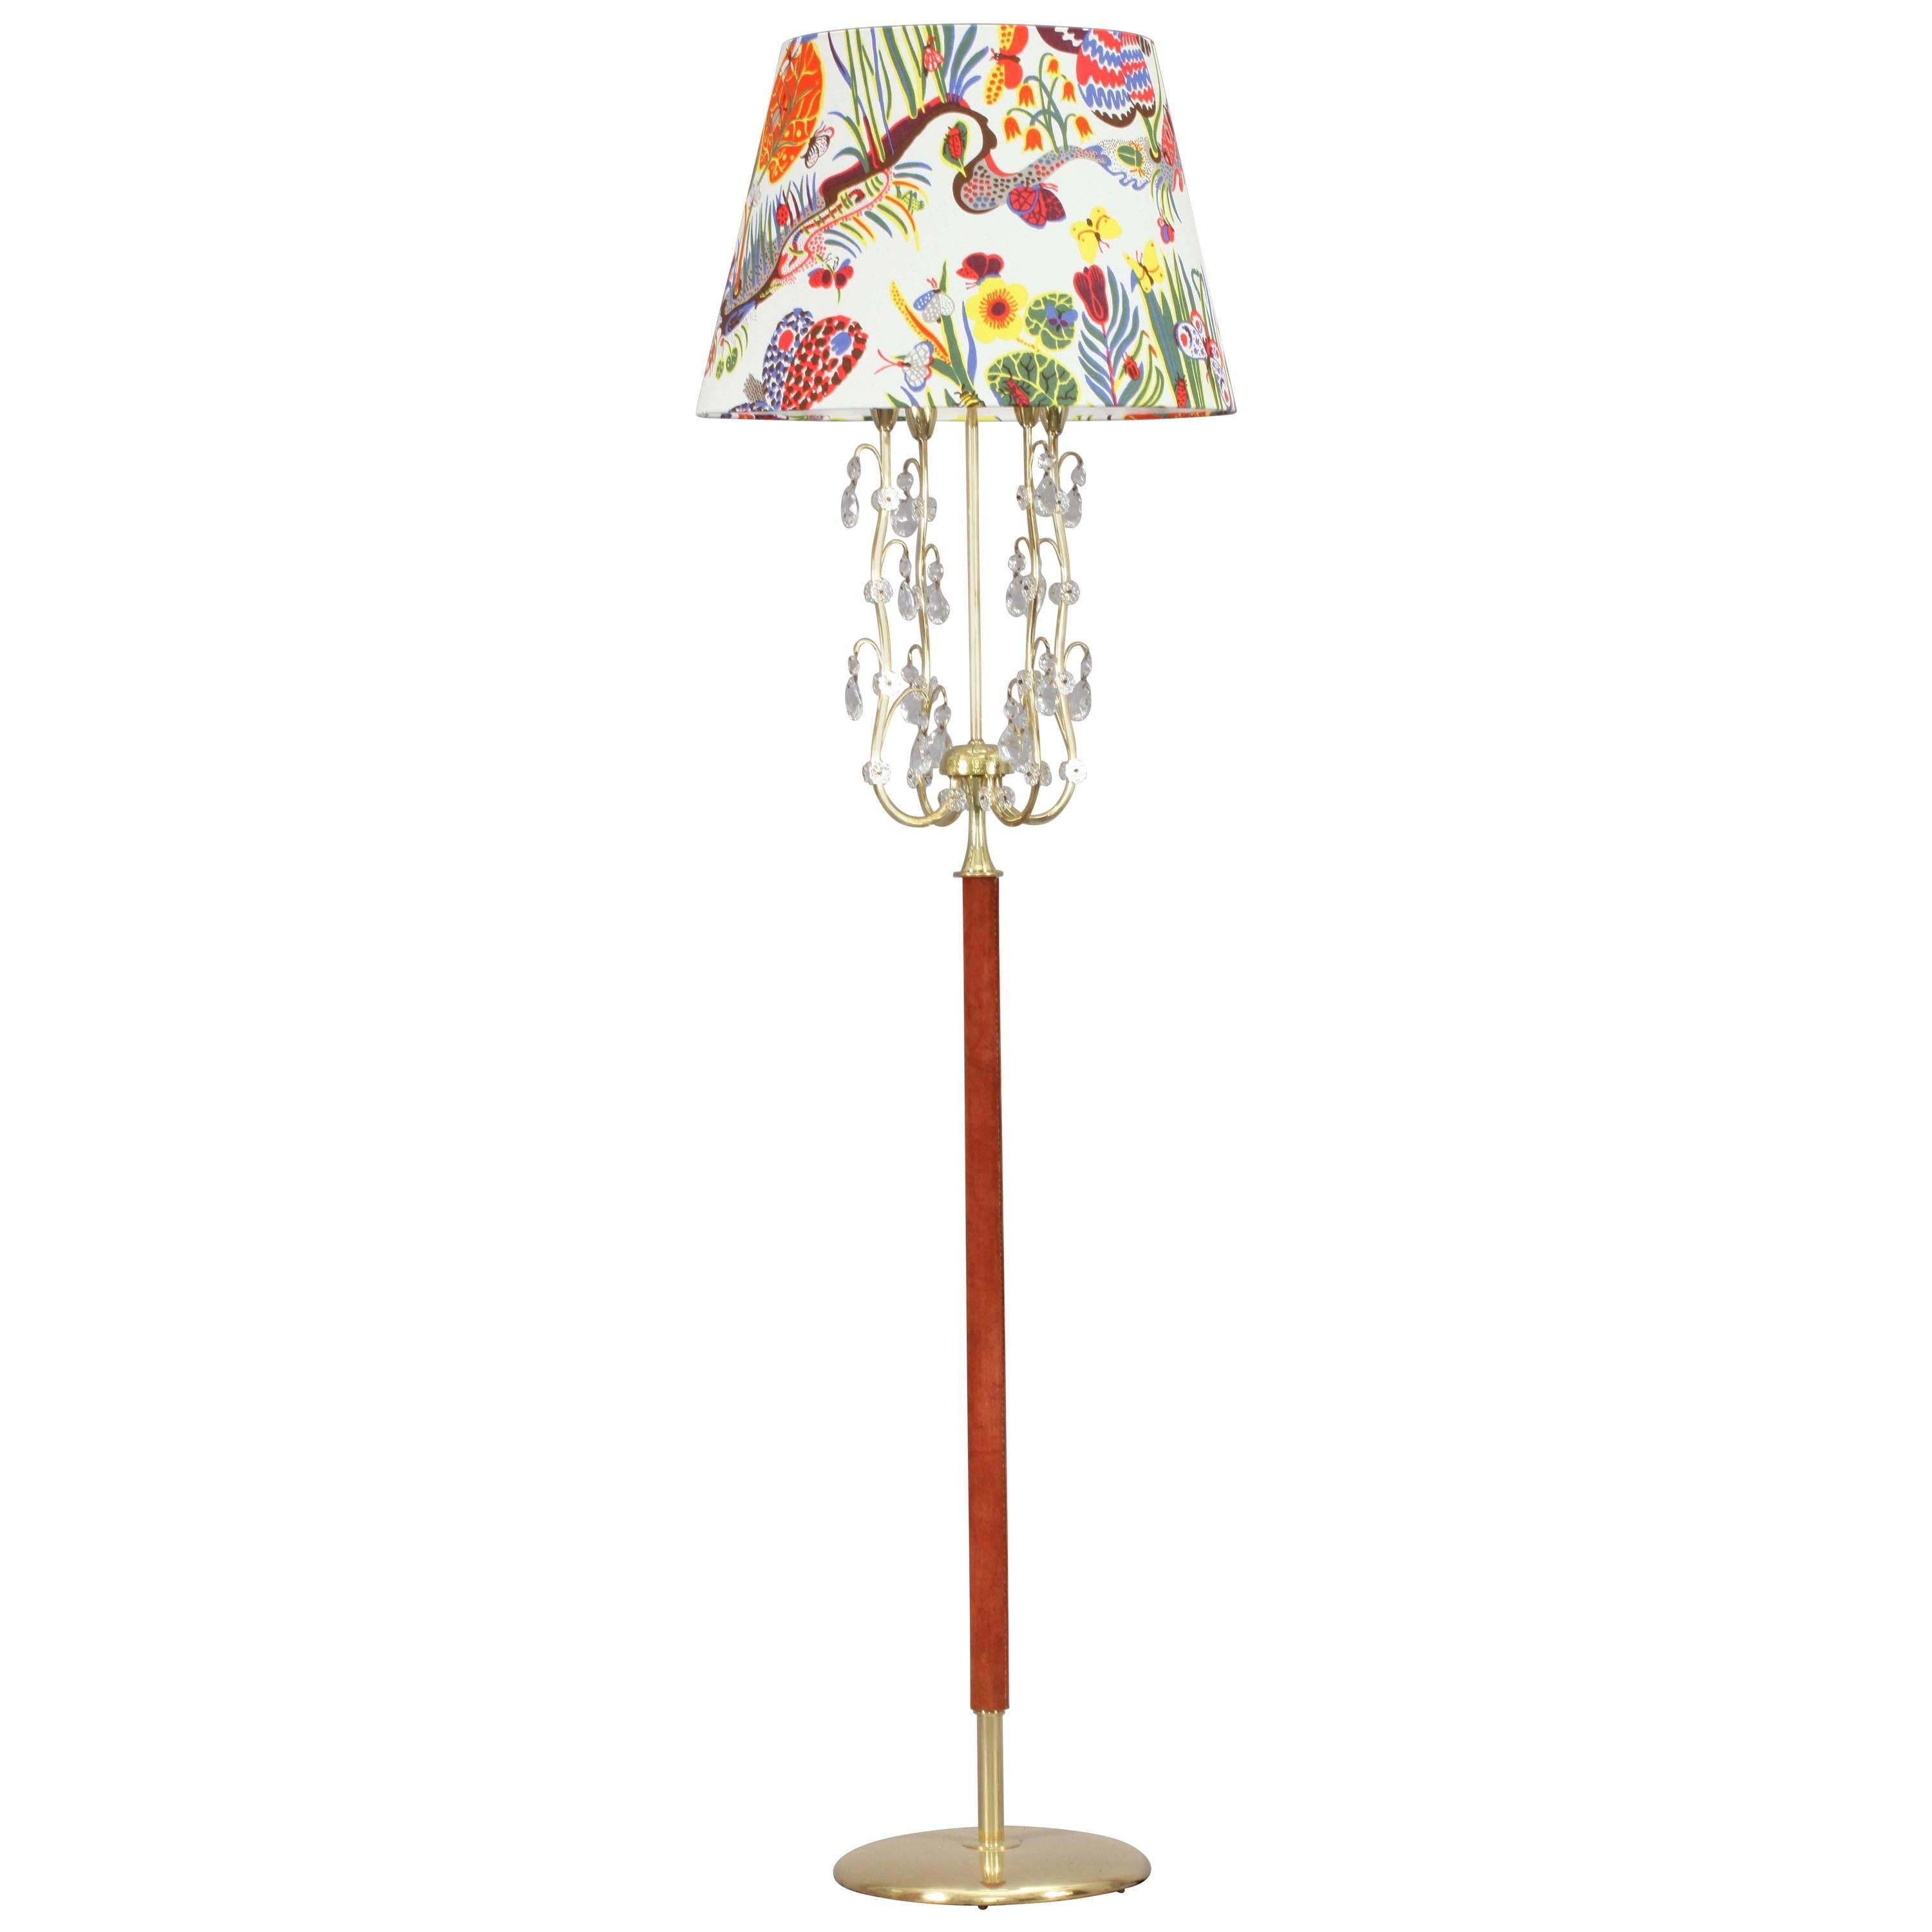 Charming Floor Lamp by Rupert Nikoll with Fabric Shade by Josef Frank